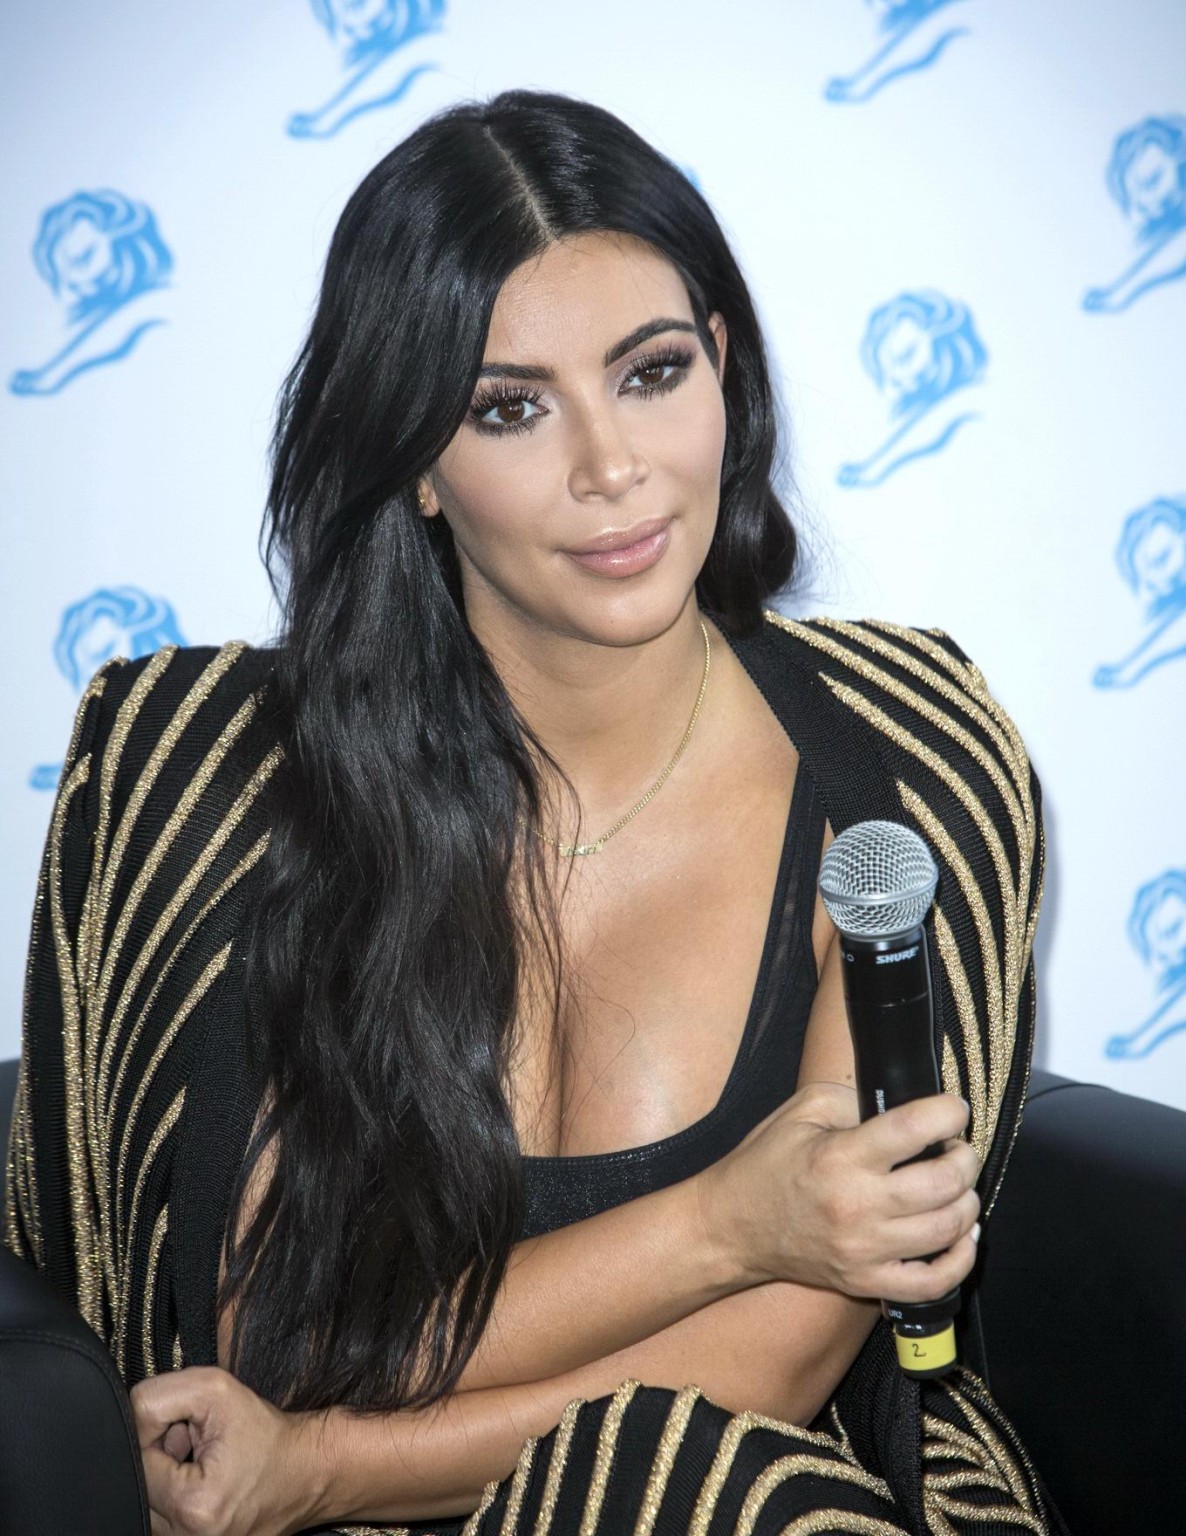 Kim Kardashian showing huge cleavage at the Cannes Lions event #75160336